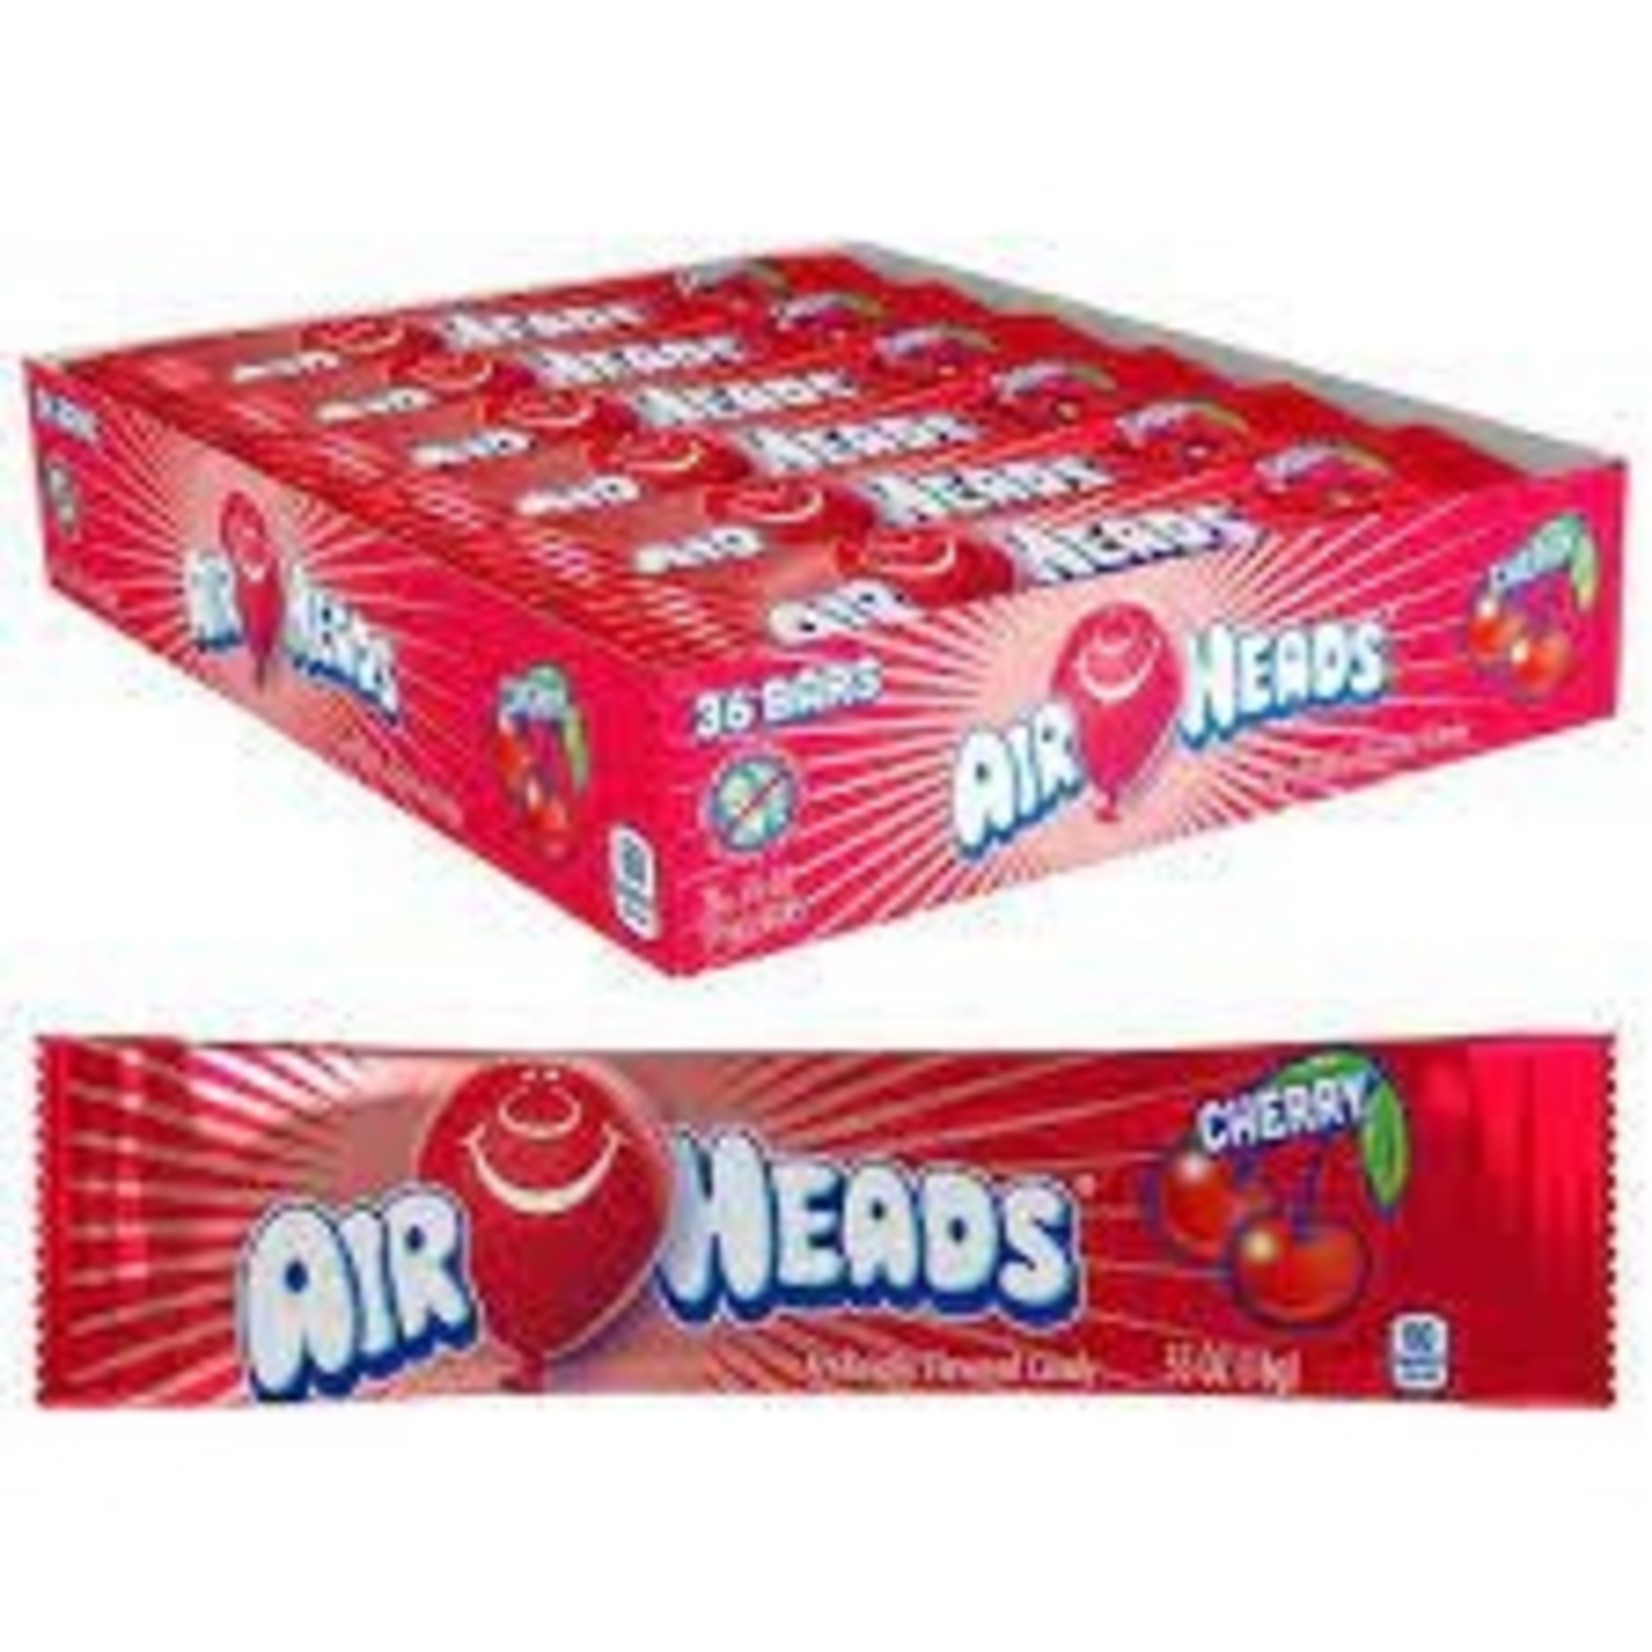 Cherry Airheads 36 count